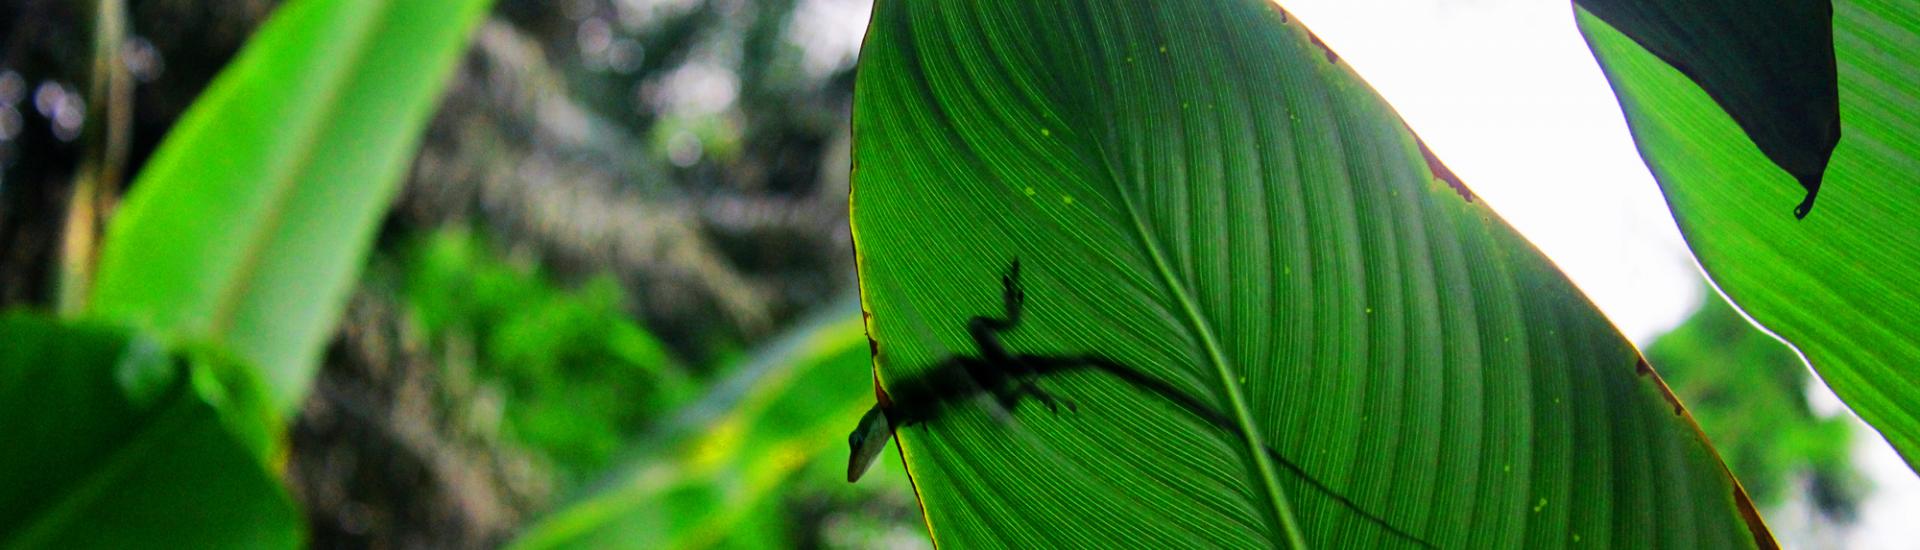 A close up view, looking up at some green leaves and you can see a small lizard on top of one of the leaves